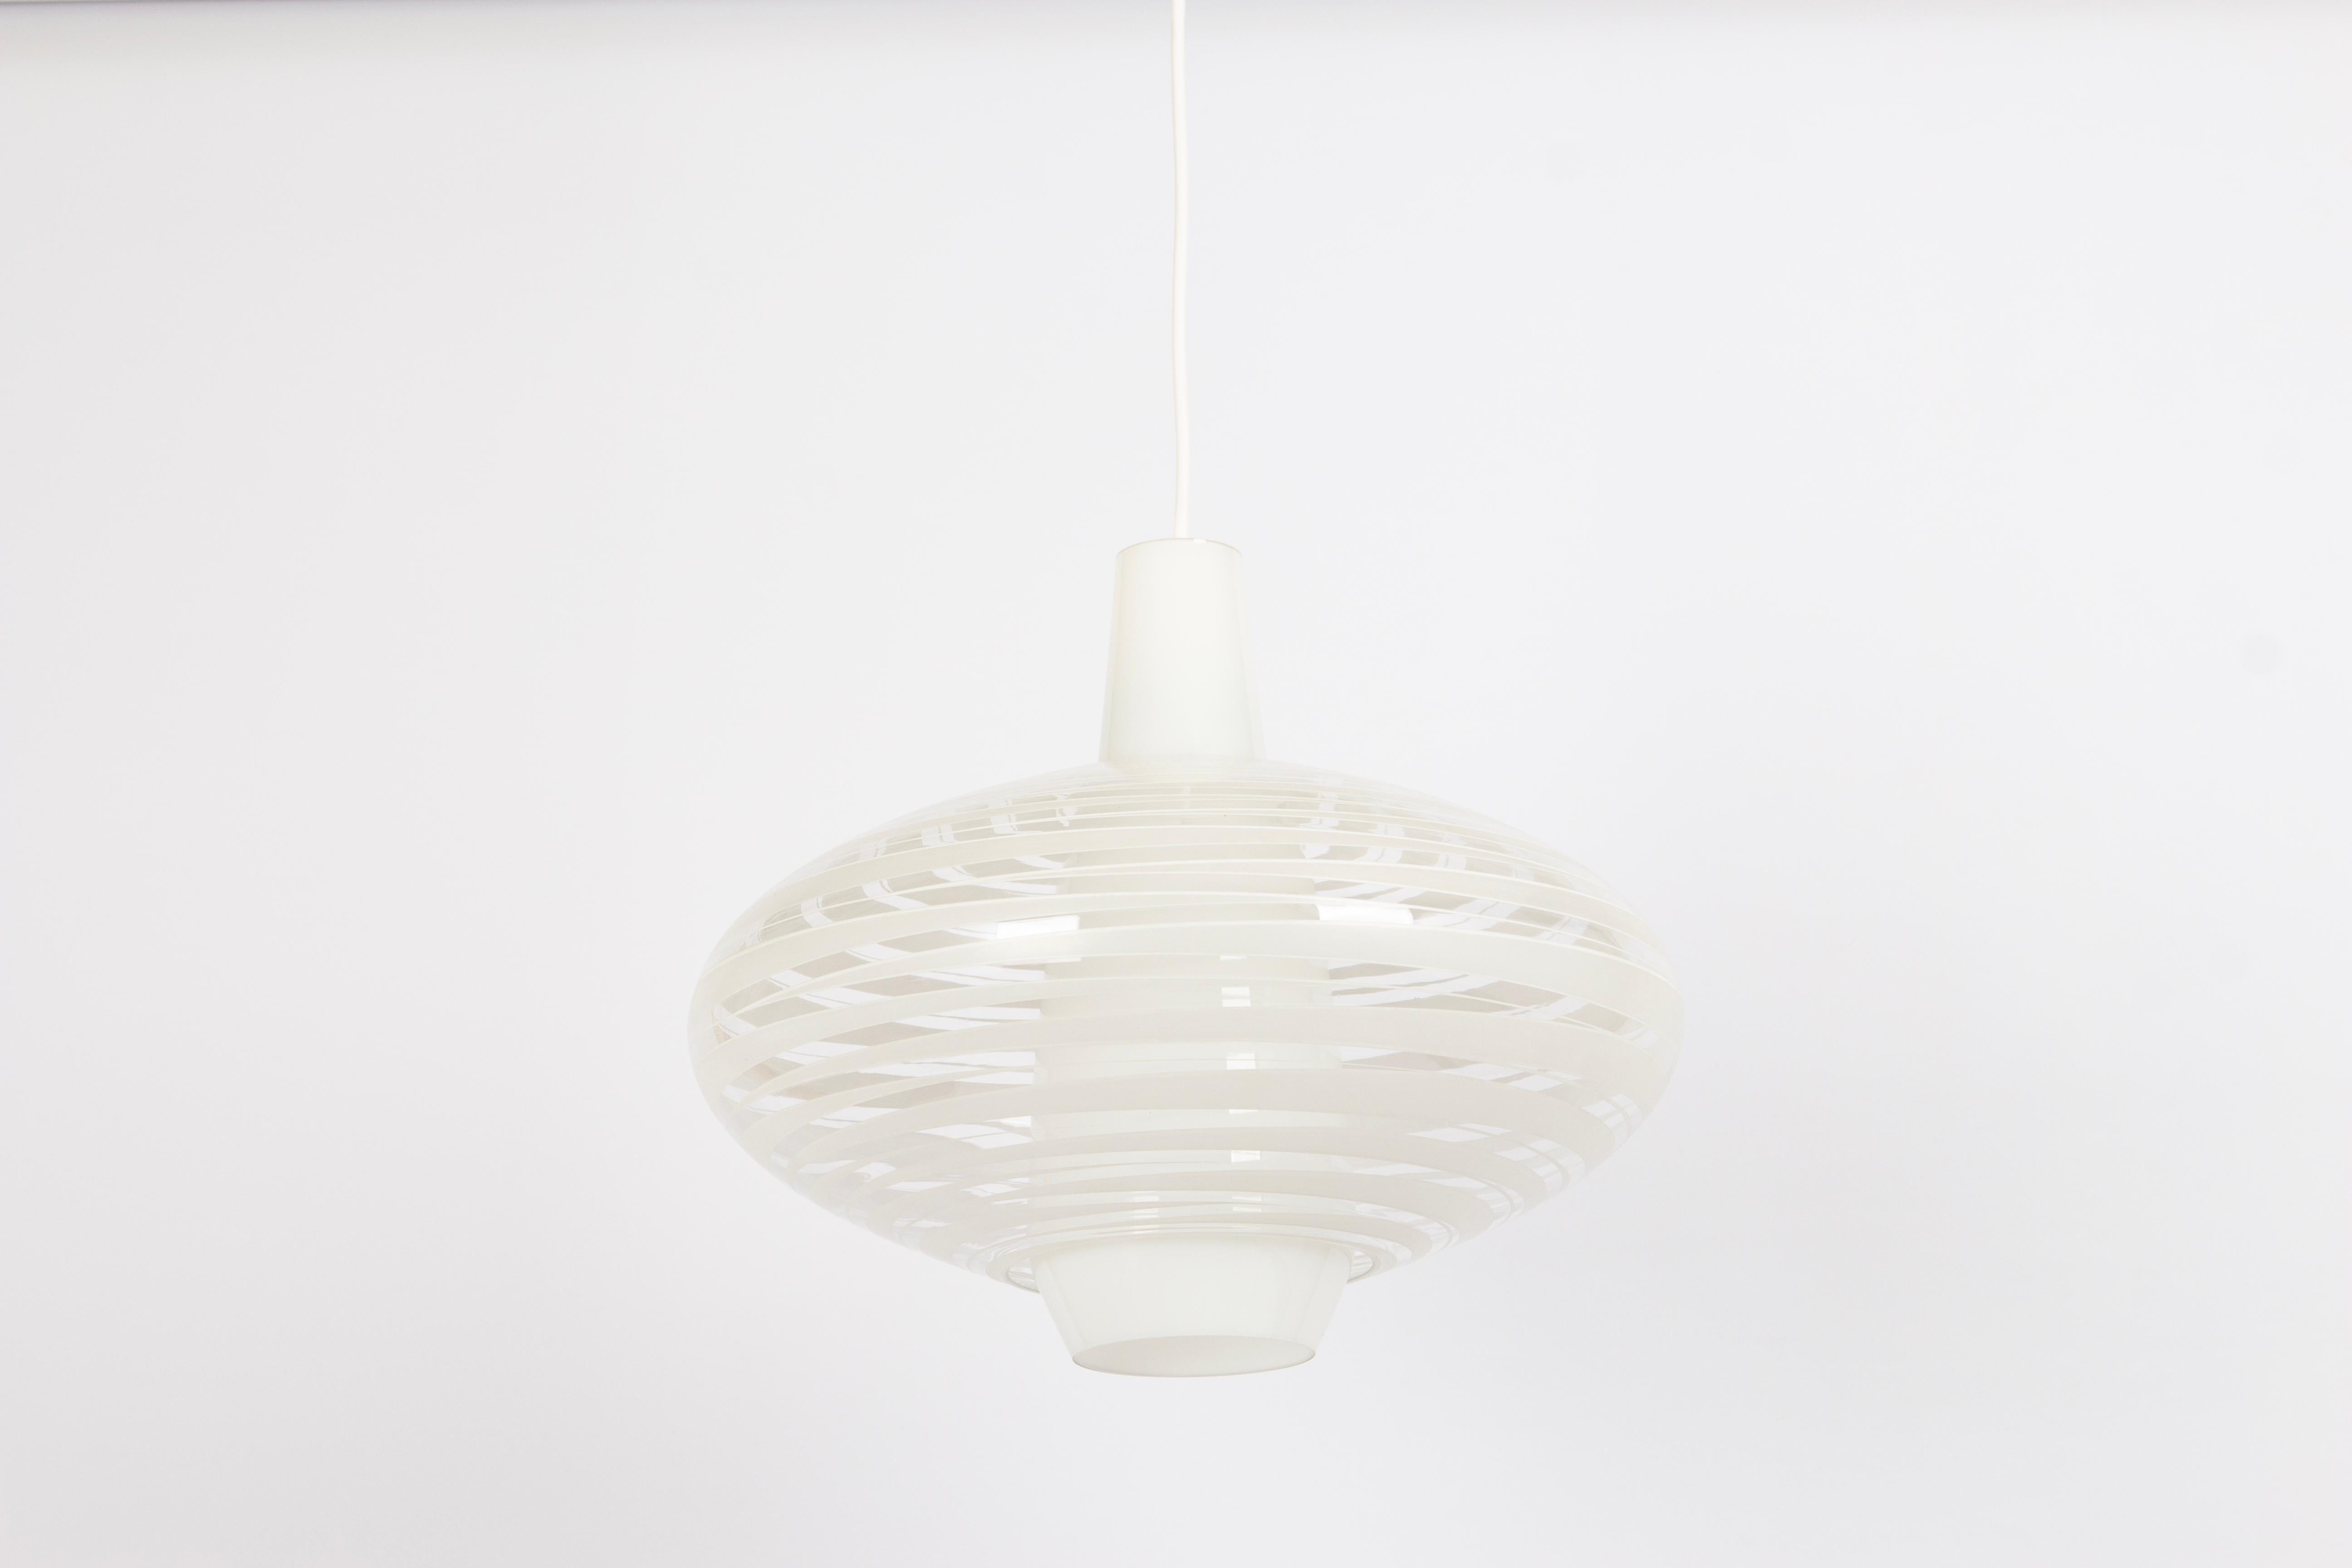 A rare stunning pendant light designed by  Aloys Gangkofner for Peill & Putzler, Bari, Germany, 1950s
He designed this model in the 1950s
Very good condition.

Socket: 1 x E26/ E27 standard bulb -up to max. 100 watt
Light bulbs are not included. It